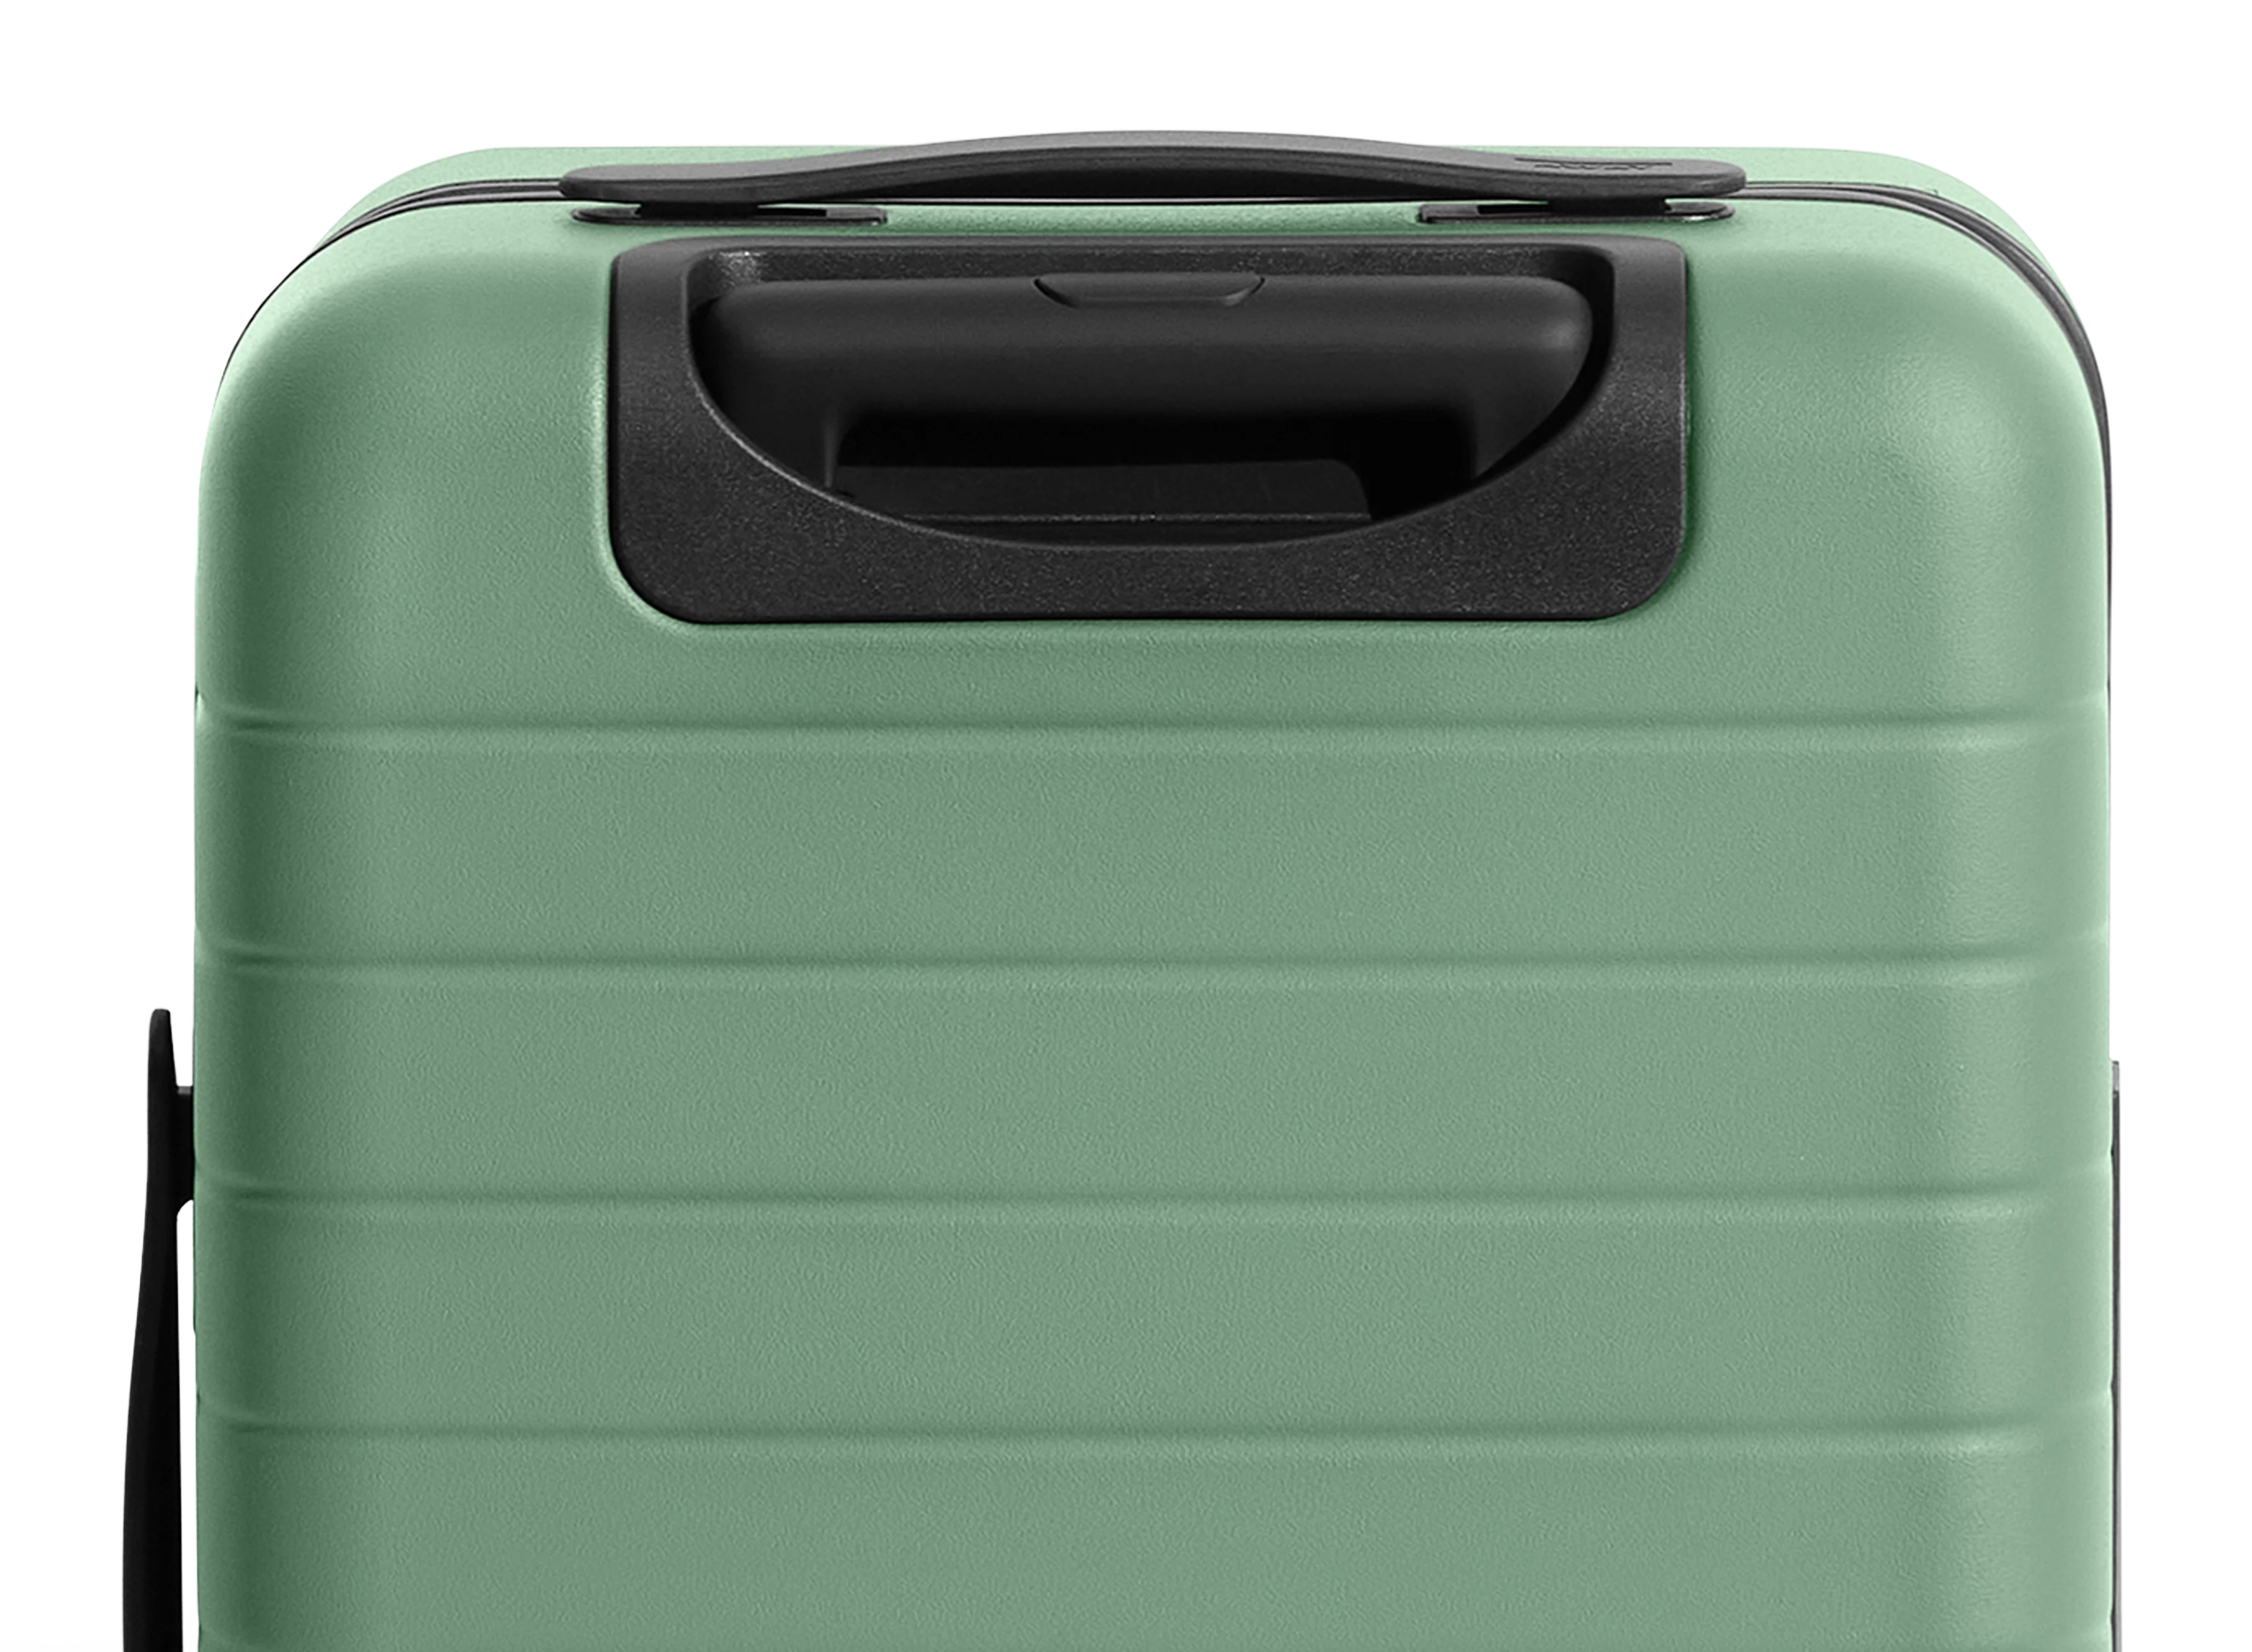 The Carry-On in Sea Green